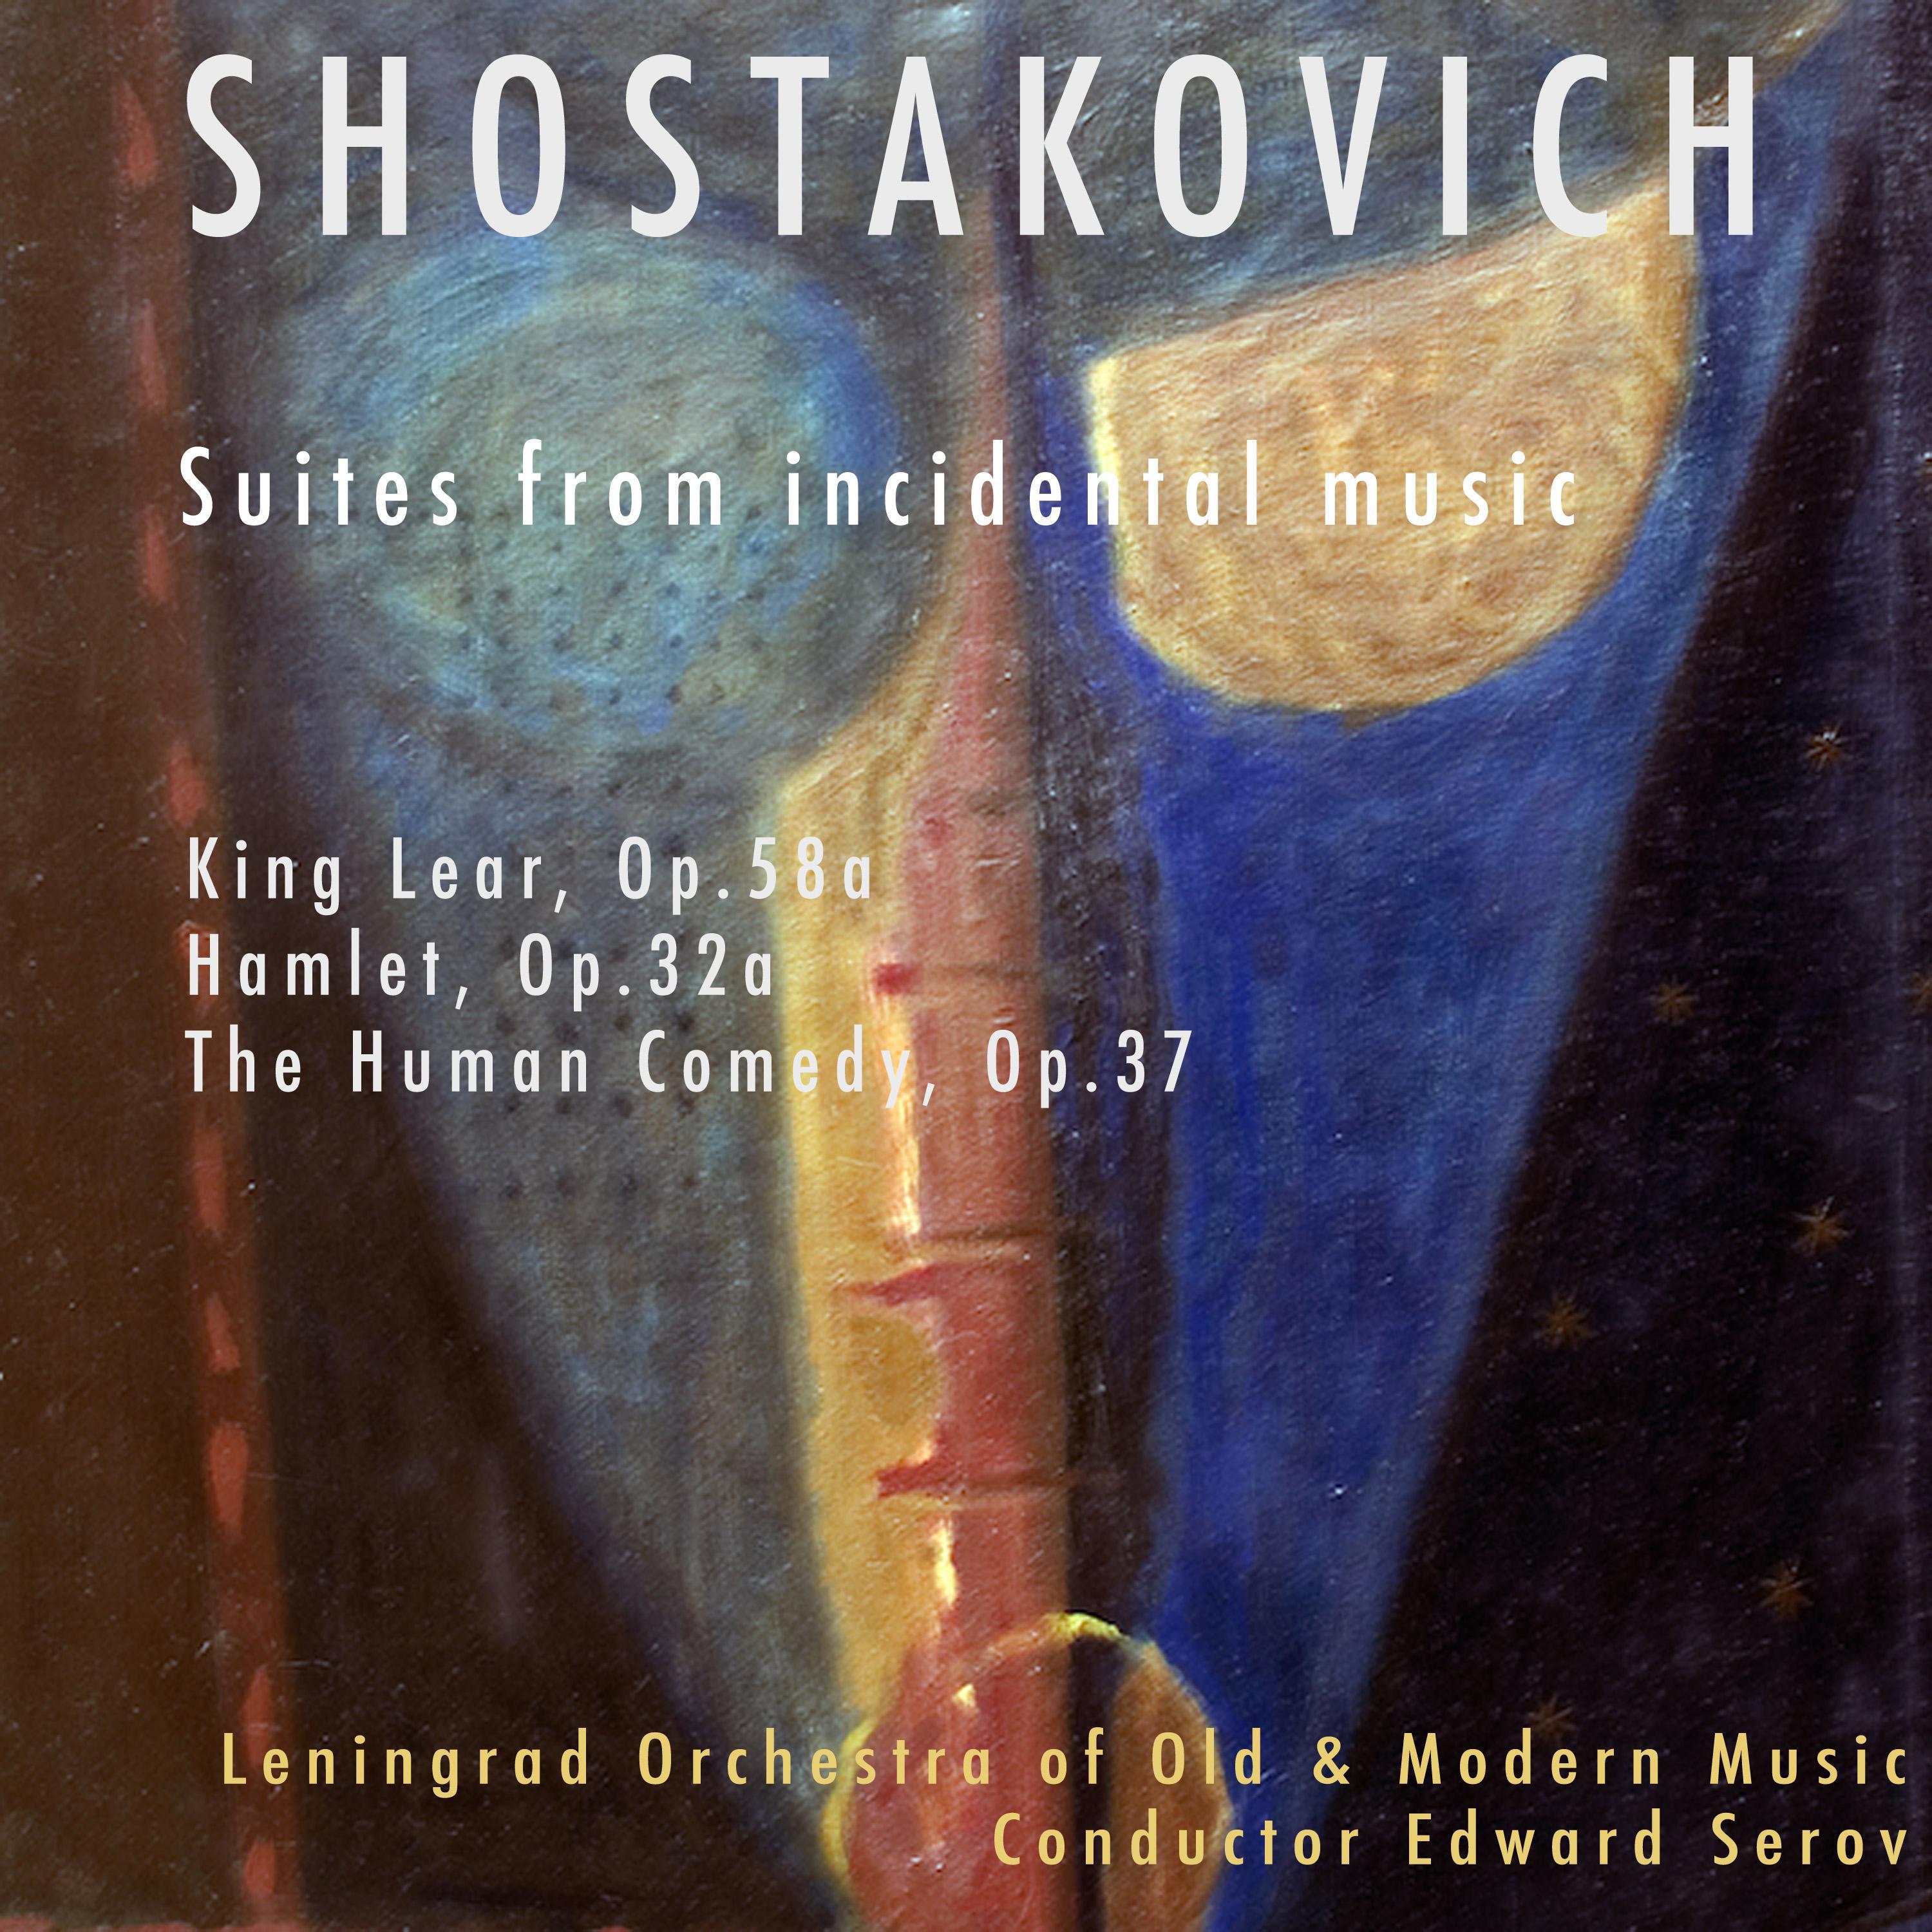 Dmitri Shostakovich: Suites From Incidental Music. King Lear, Op. 58a. Hamlet, Op. 32a. The Human Comedy, Op. 37